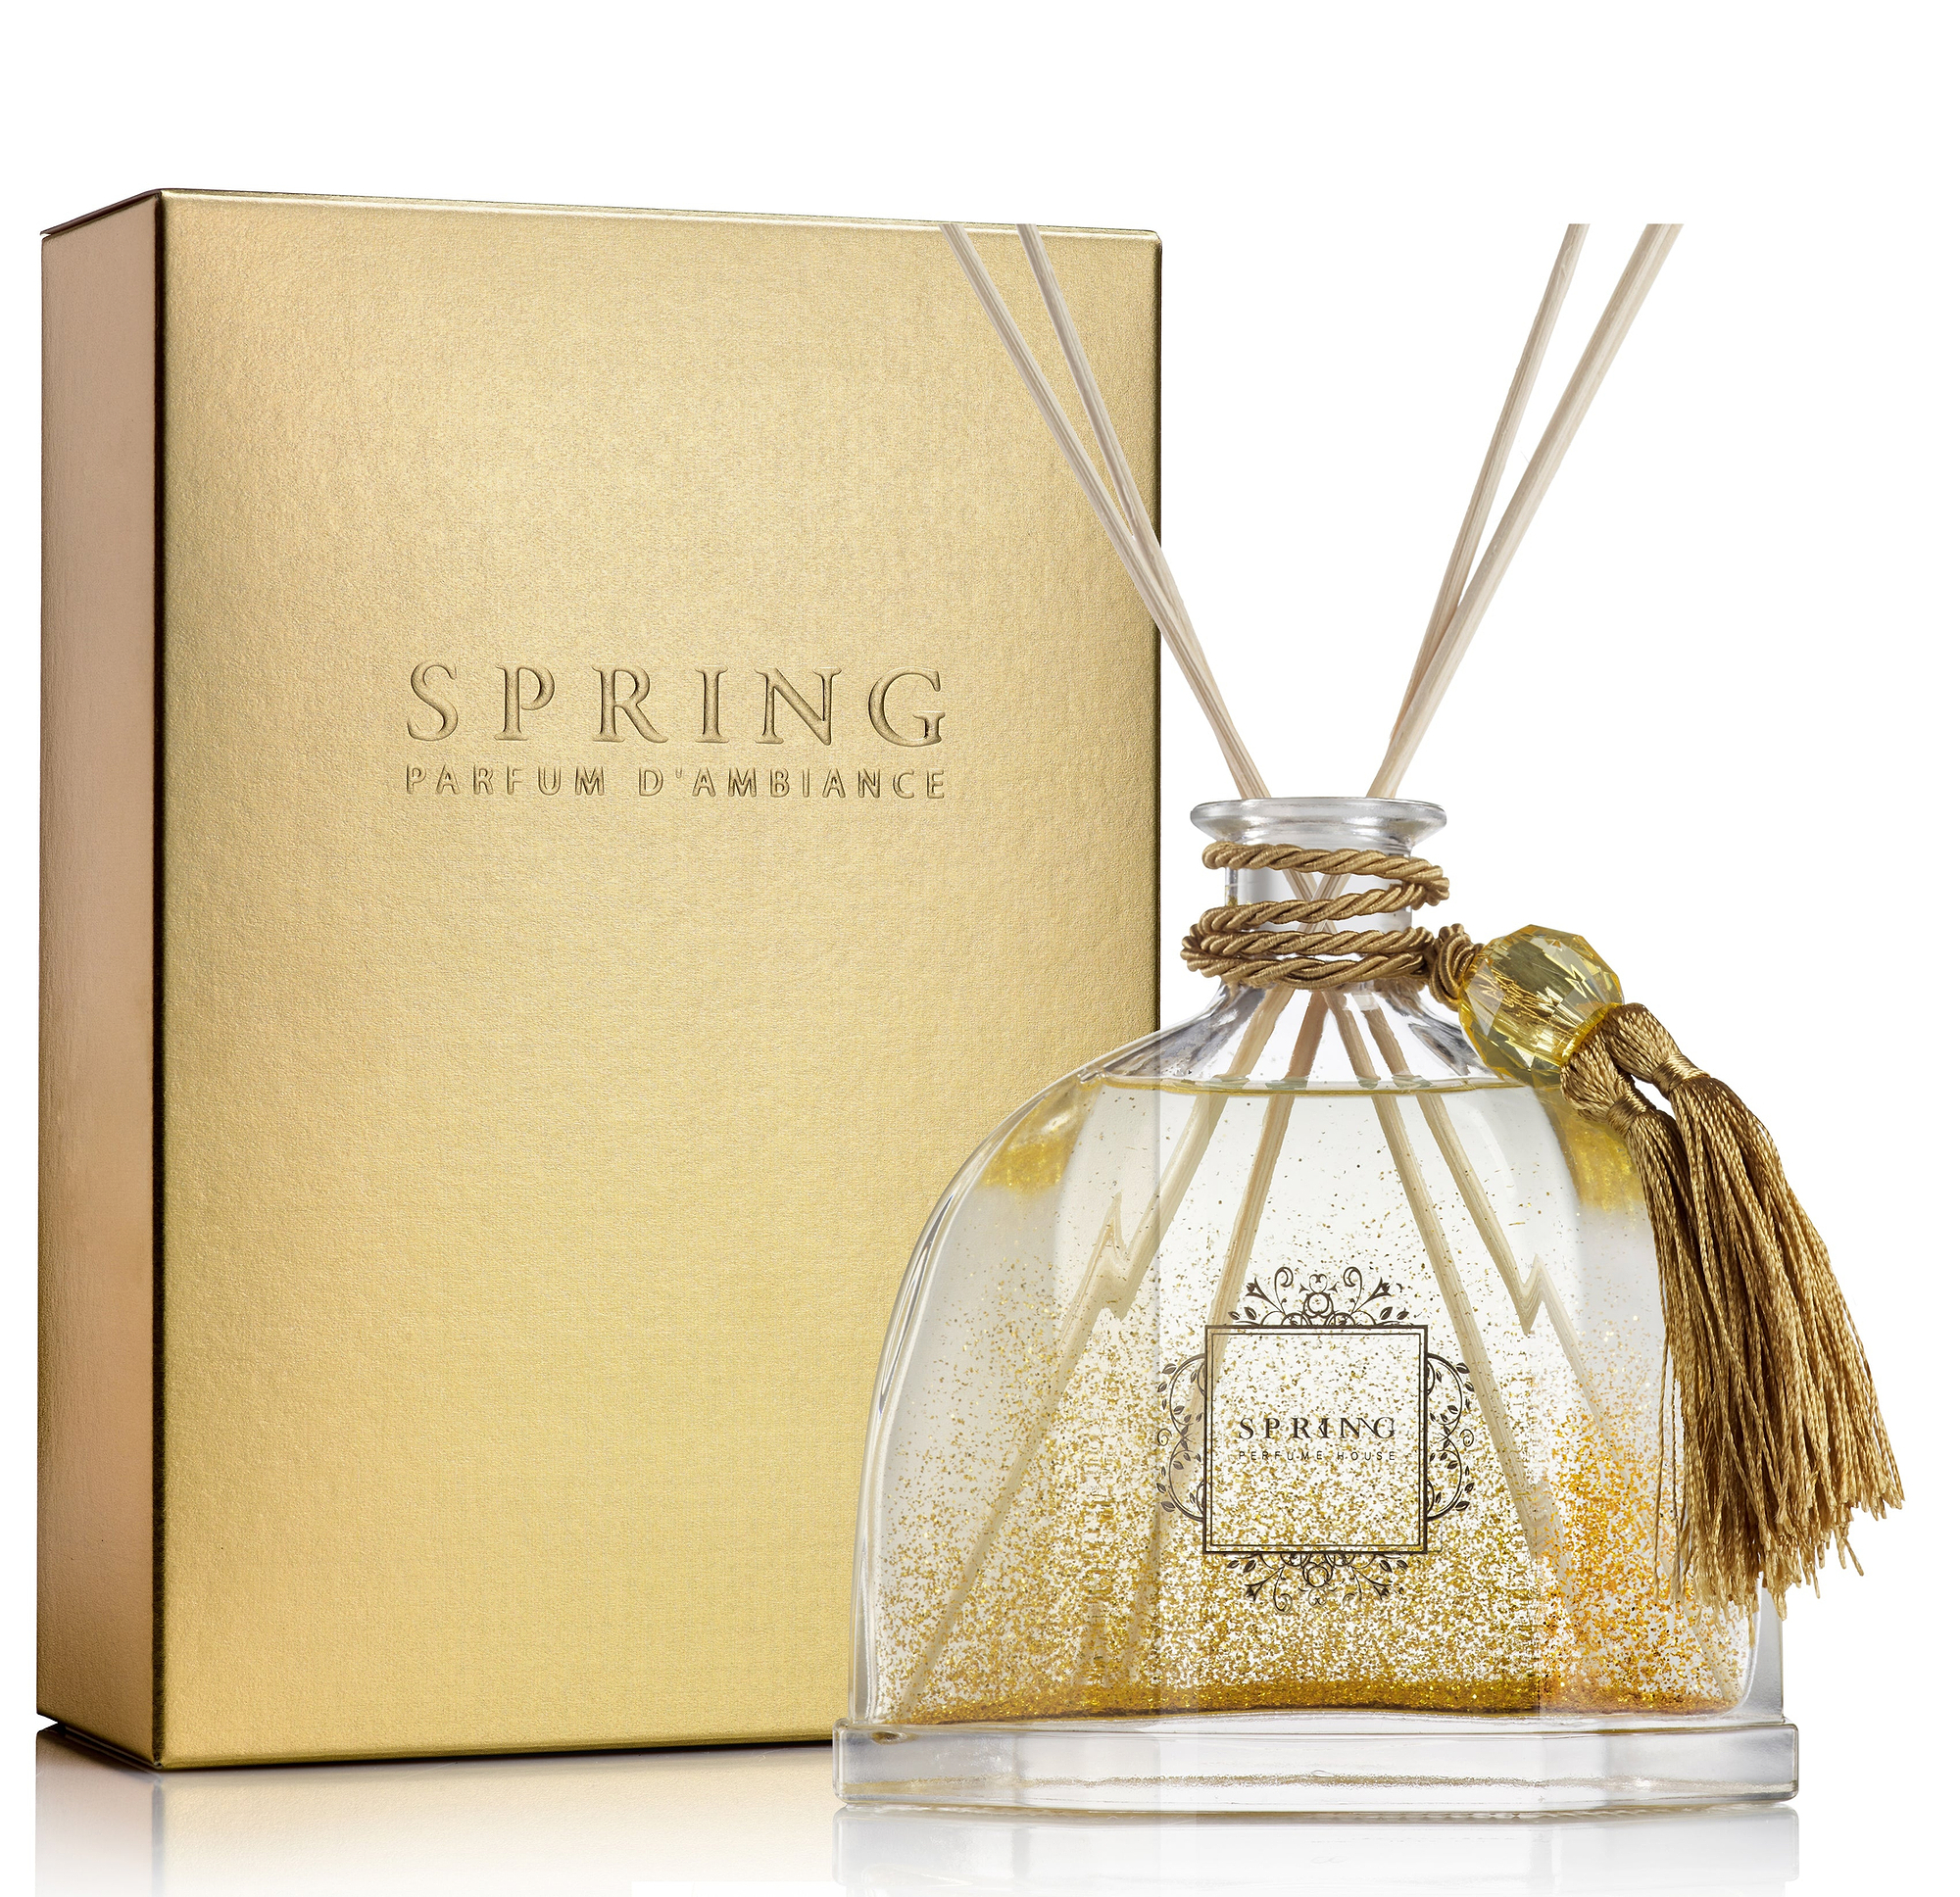 SPRING Fragrance Diamond Decanter Reed Diffuser Set | Very Large 10.14 Oz (300ml) | Fragrance Made in France| Home Décor | Scented Aromatic Oil with Gold Glitters - White flower | Room Air Freshener |